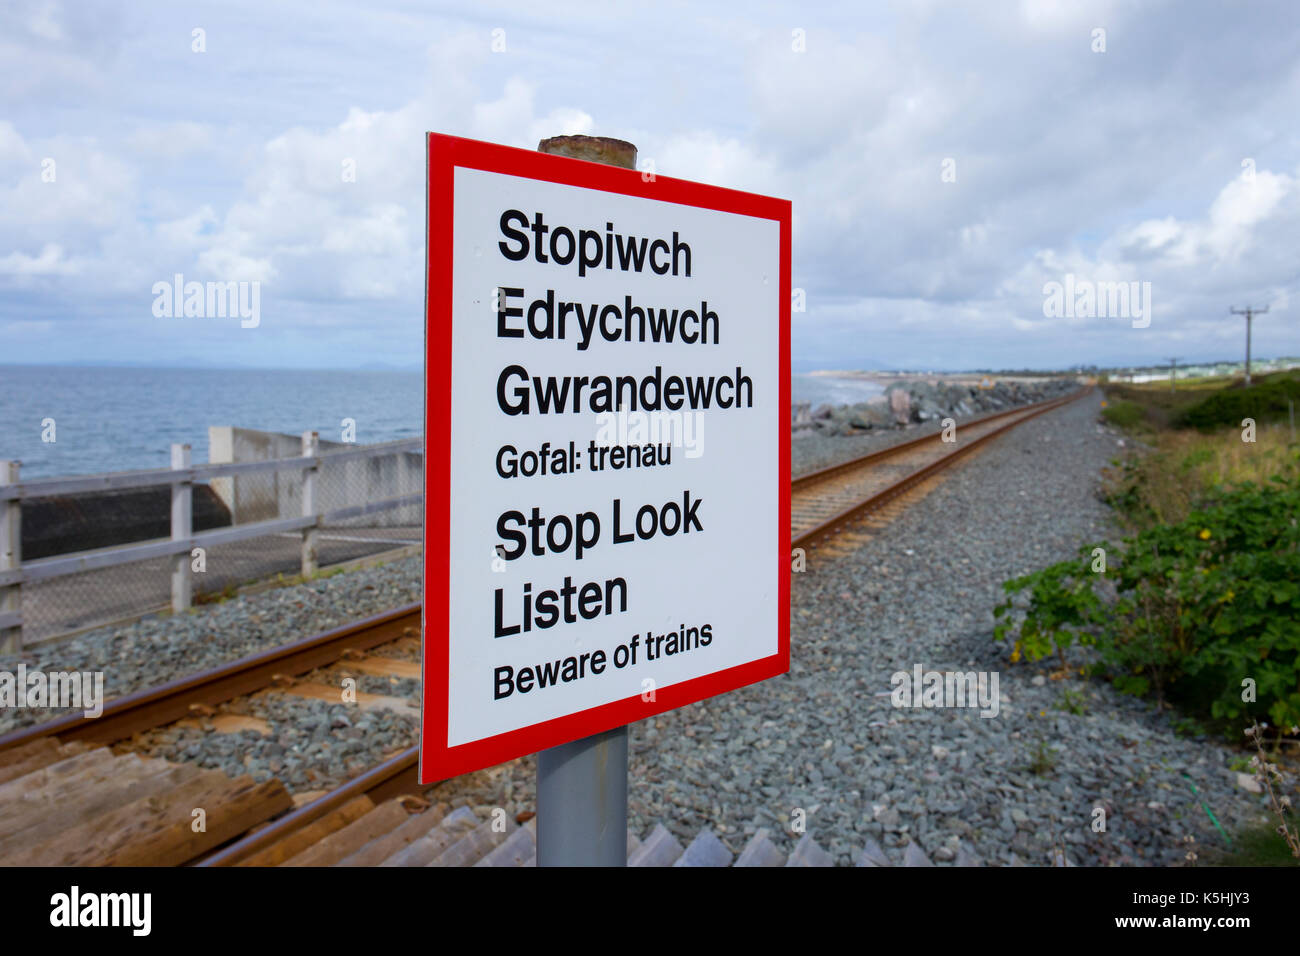 Stop Look Listen warning sign on the Cambrian Coast Line in Wales UK Stock Photo